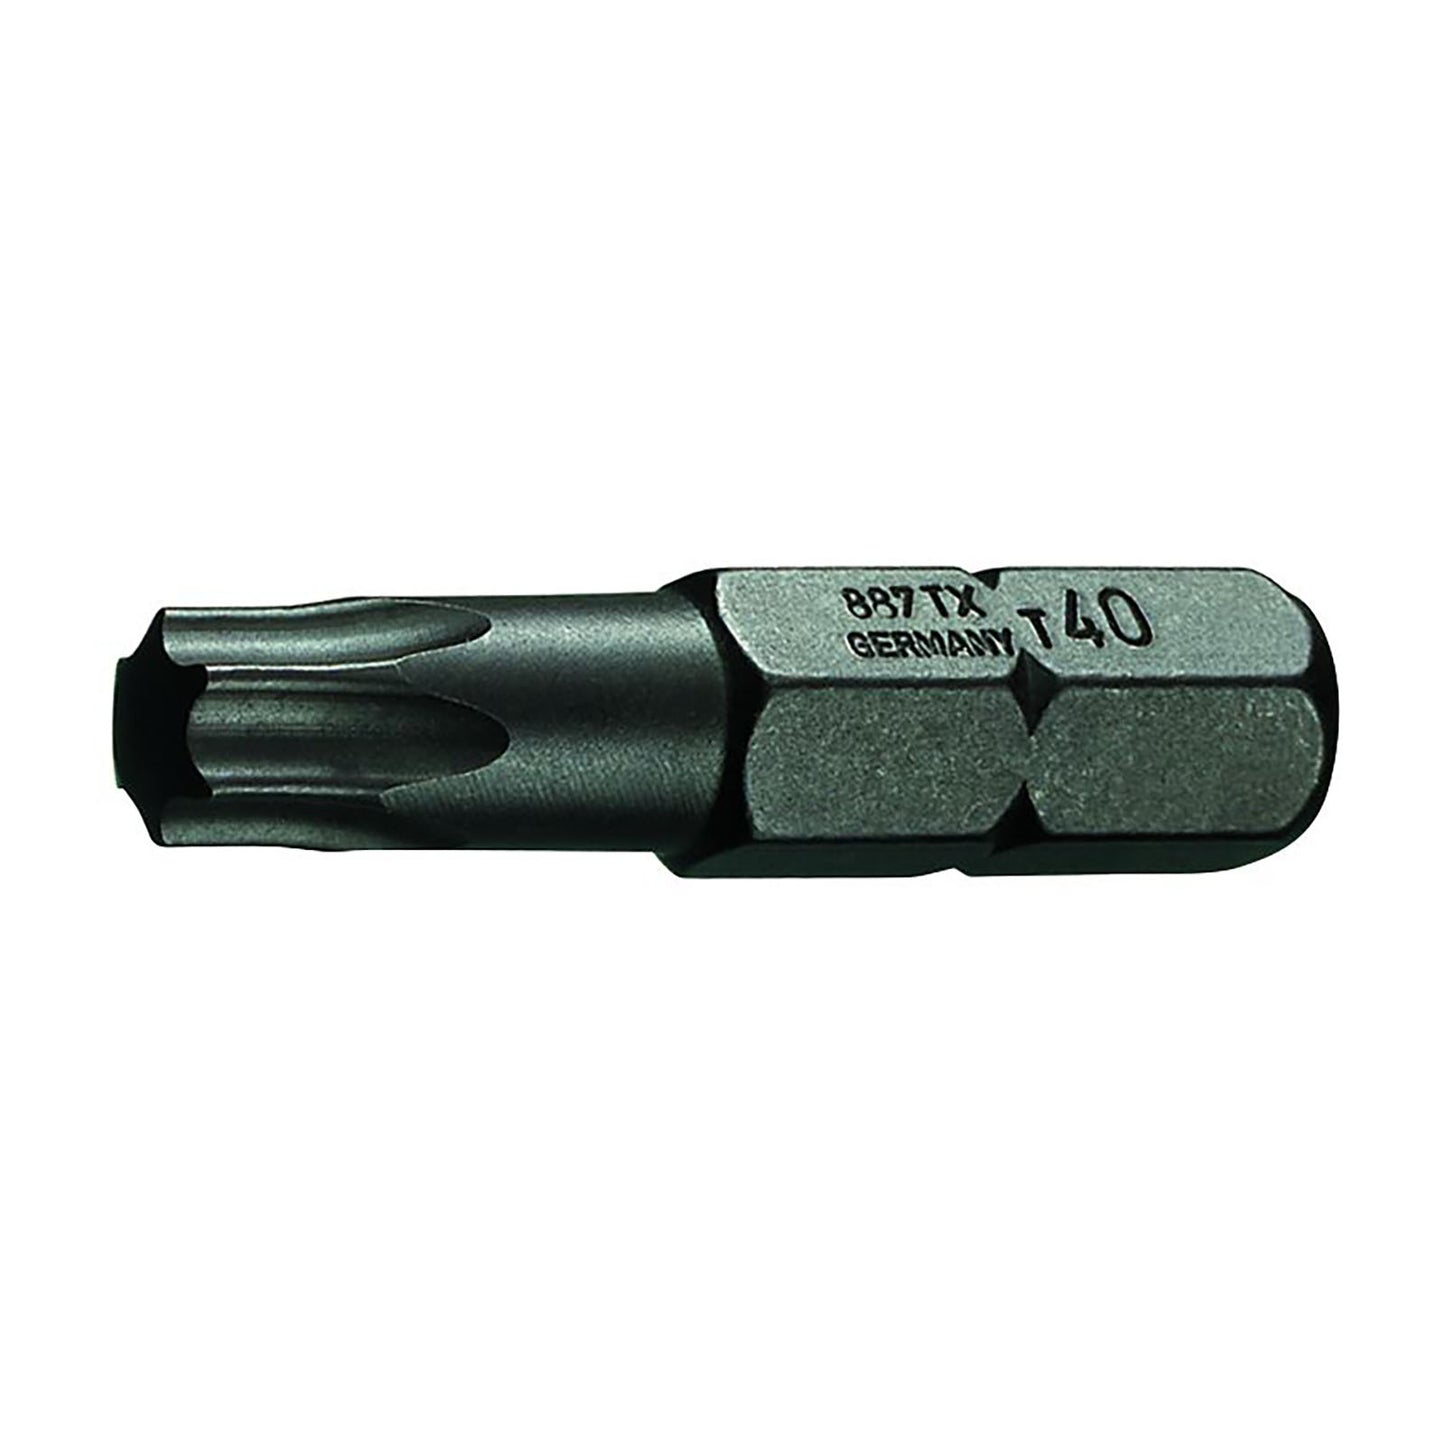 GEDORE 687 TX T15 S-010 - Embout TORX® 1/4", T15 (6542480)